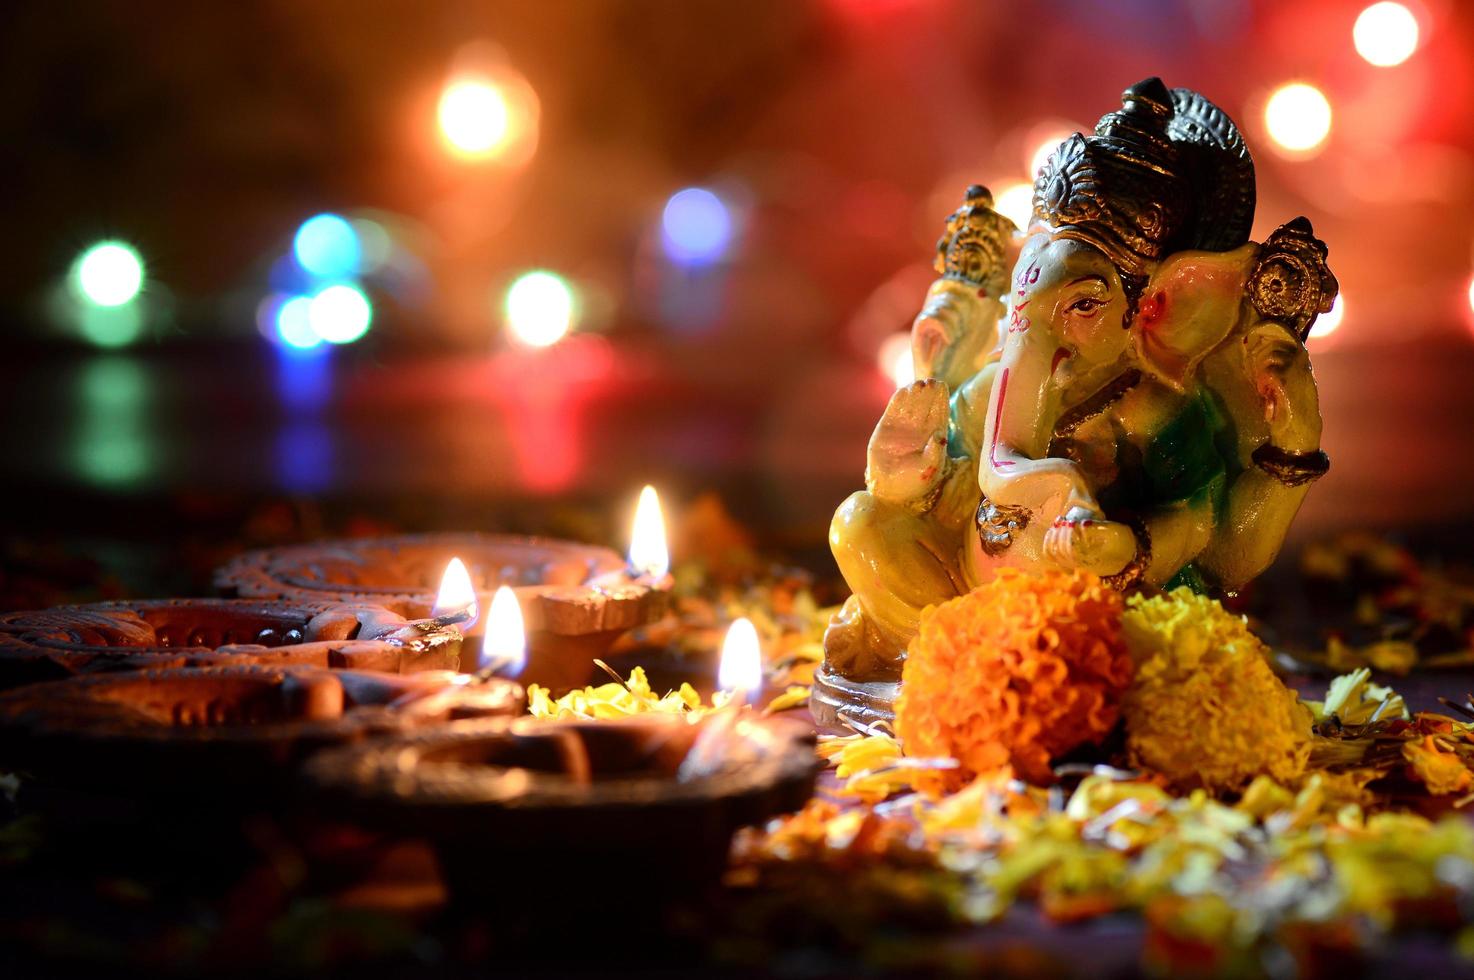 Lord Ganesha during Diwali celebration with colorful lights  photo